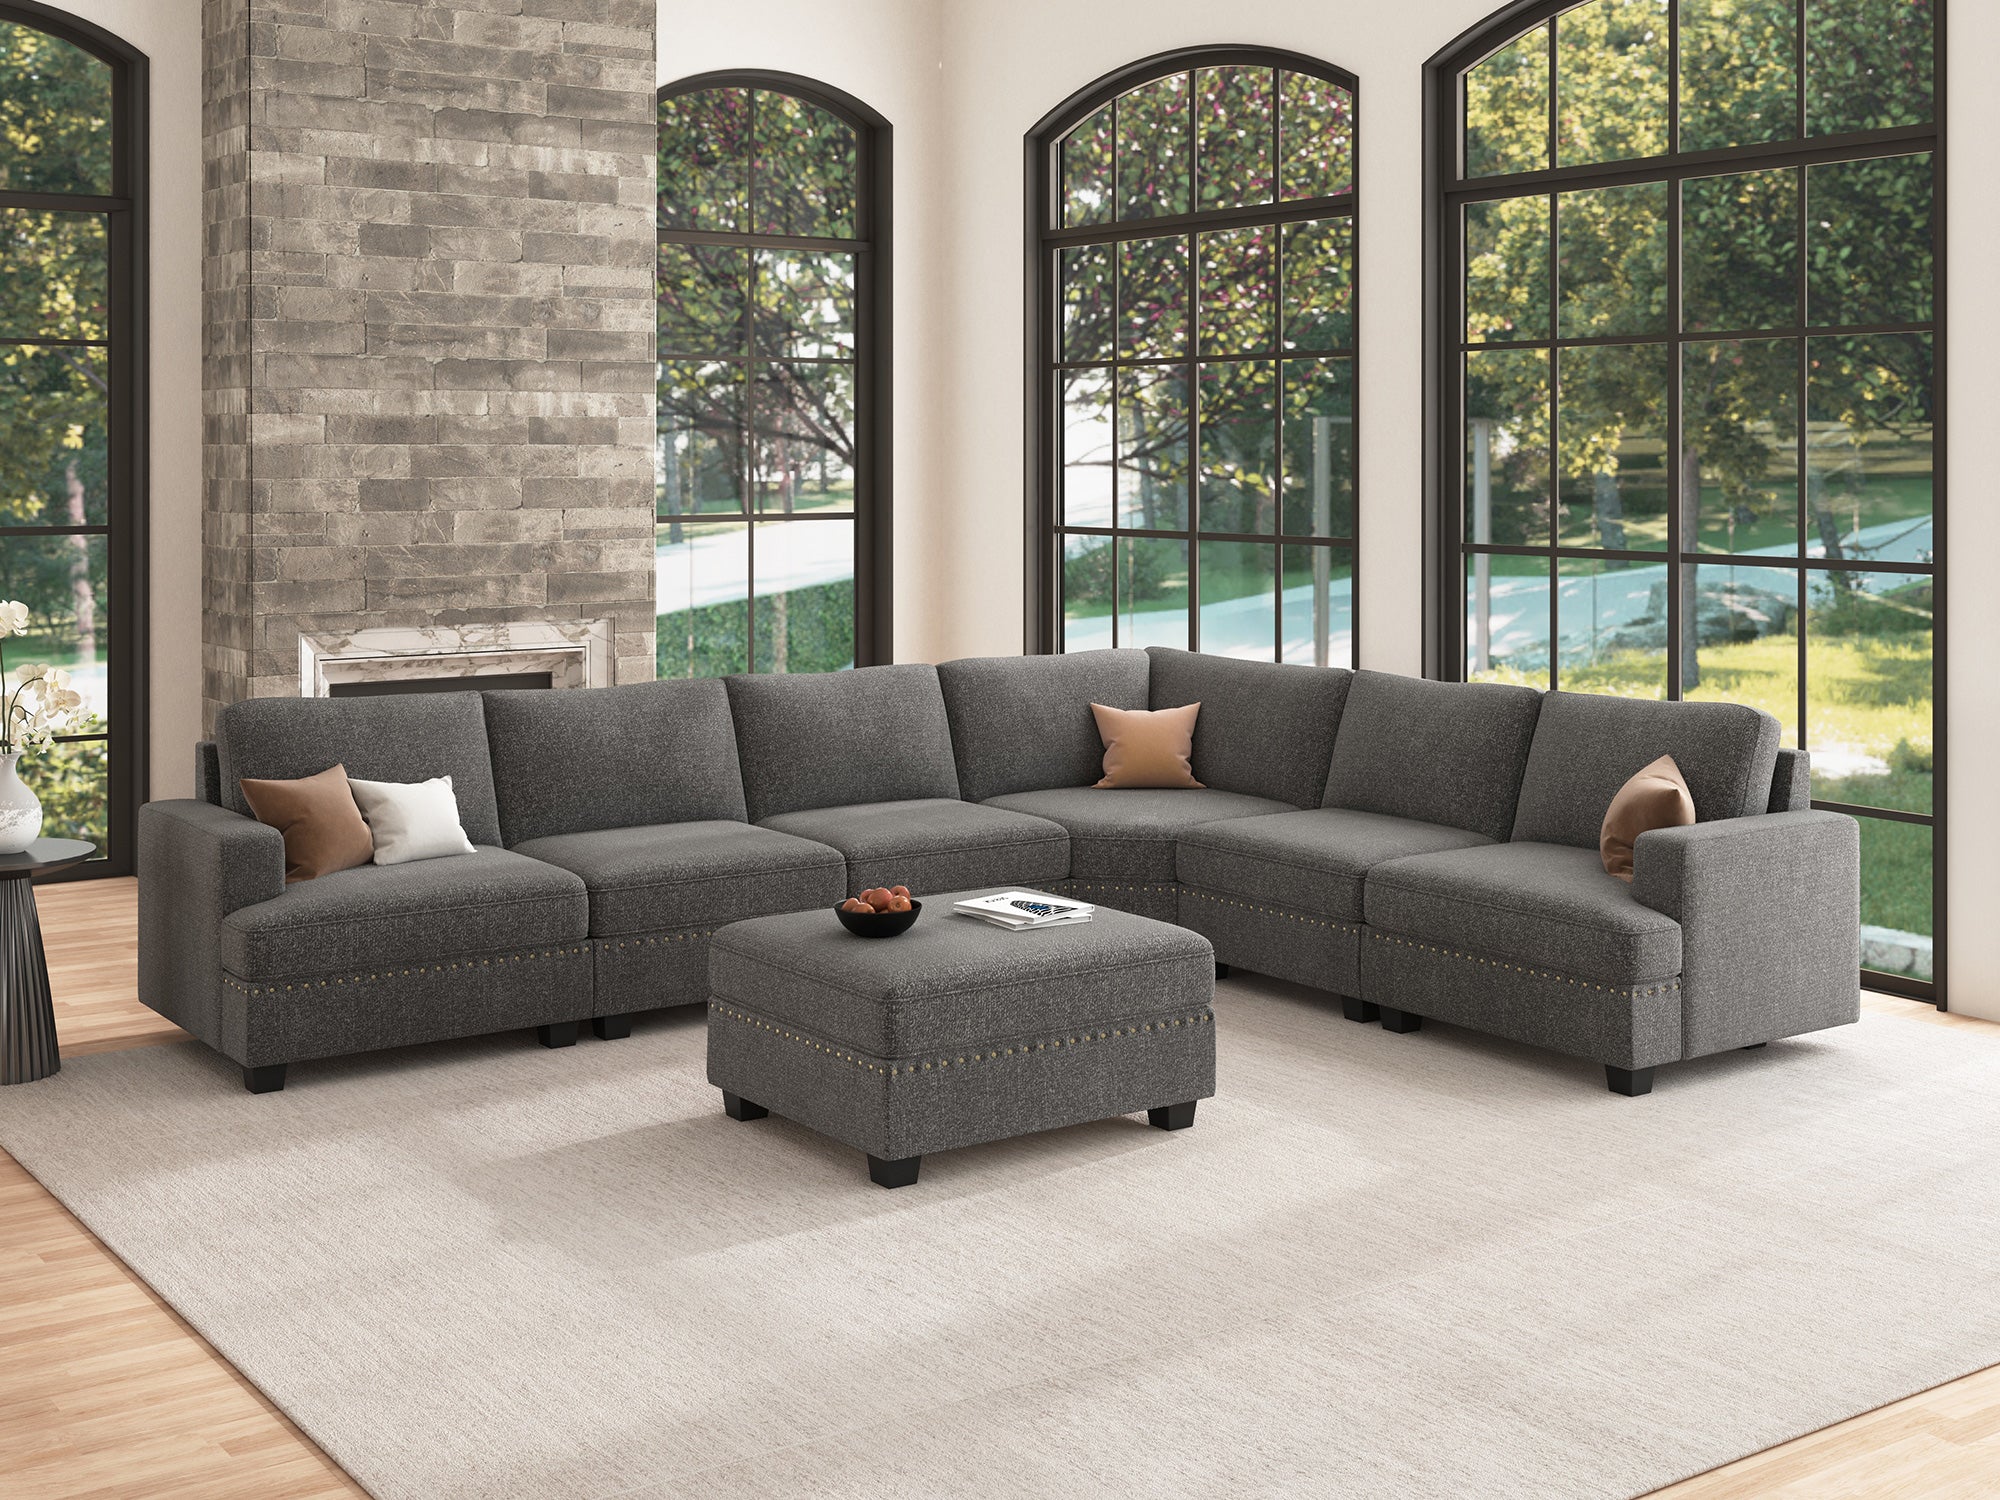 HONBAY 6-Seat Corner Modular Sofa Oversized Sectional Sofa Couch with Storage Reversible Ottoman #Color_Light Grey